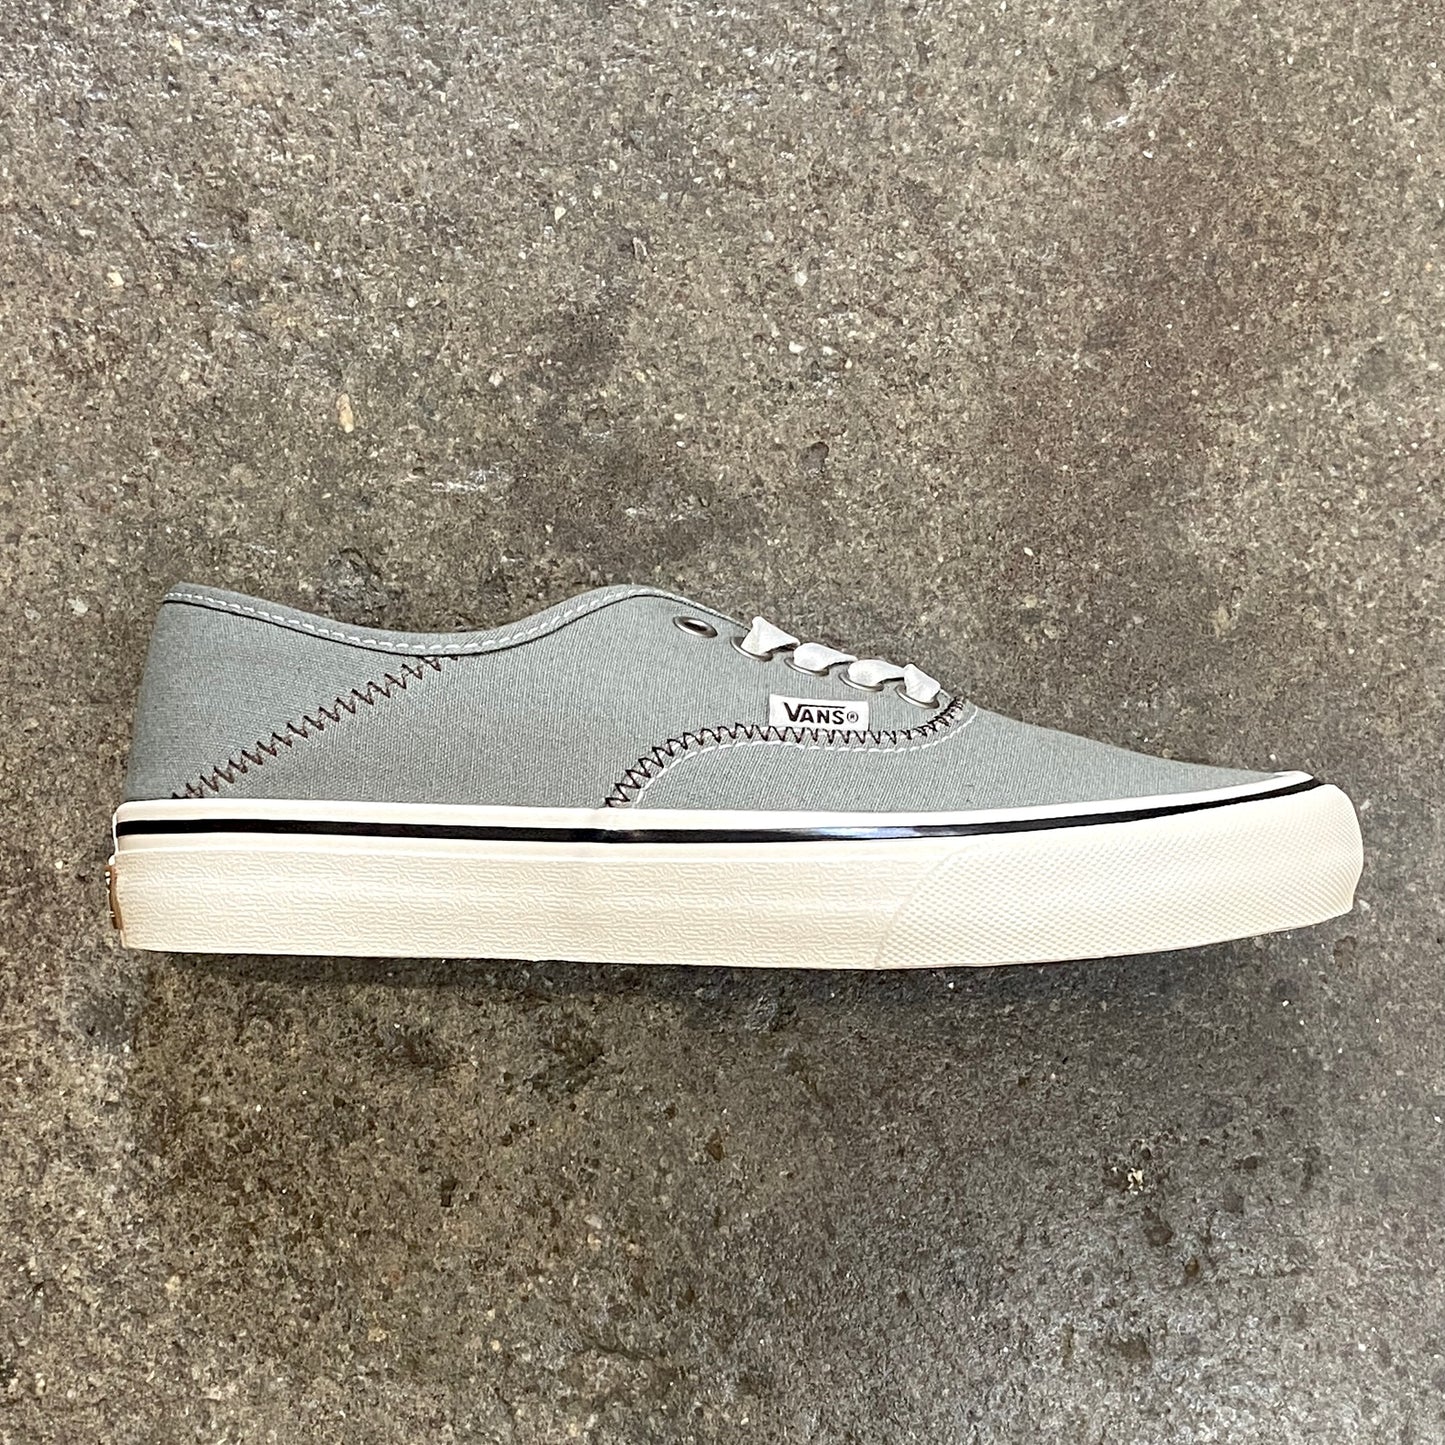 VANS AUTHENTIC VR3 SF X MIKEY FEBRUARY SHOE